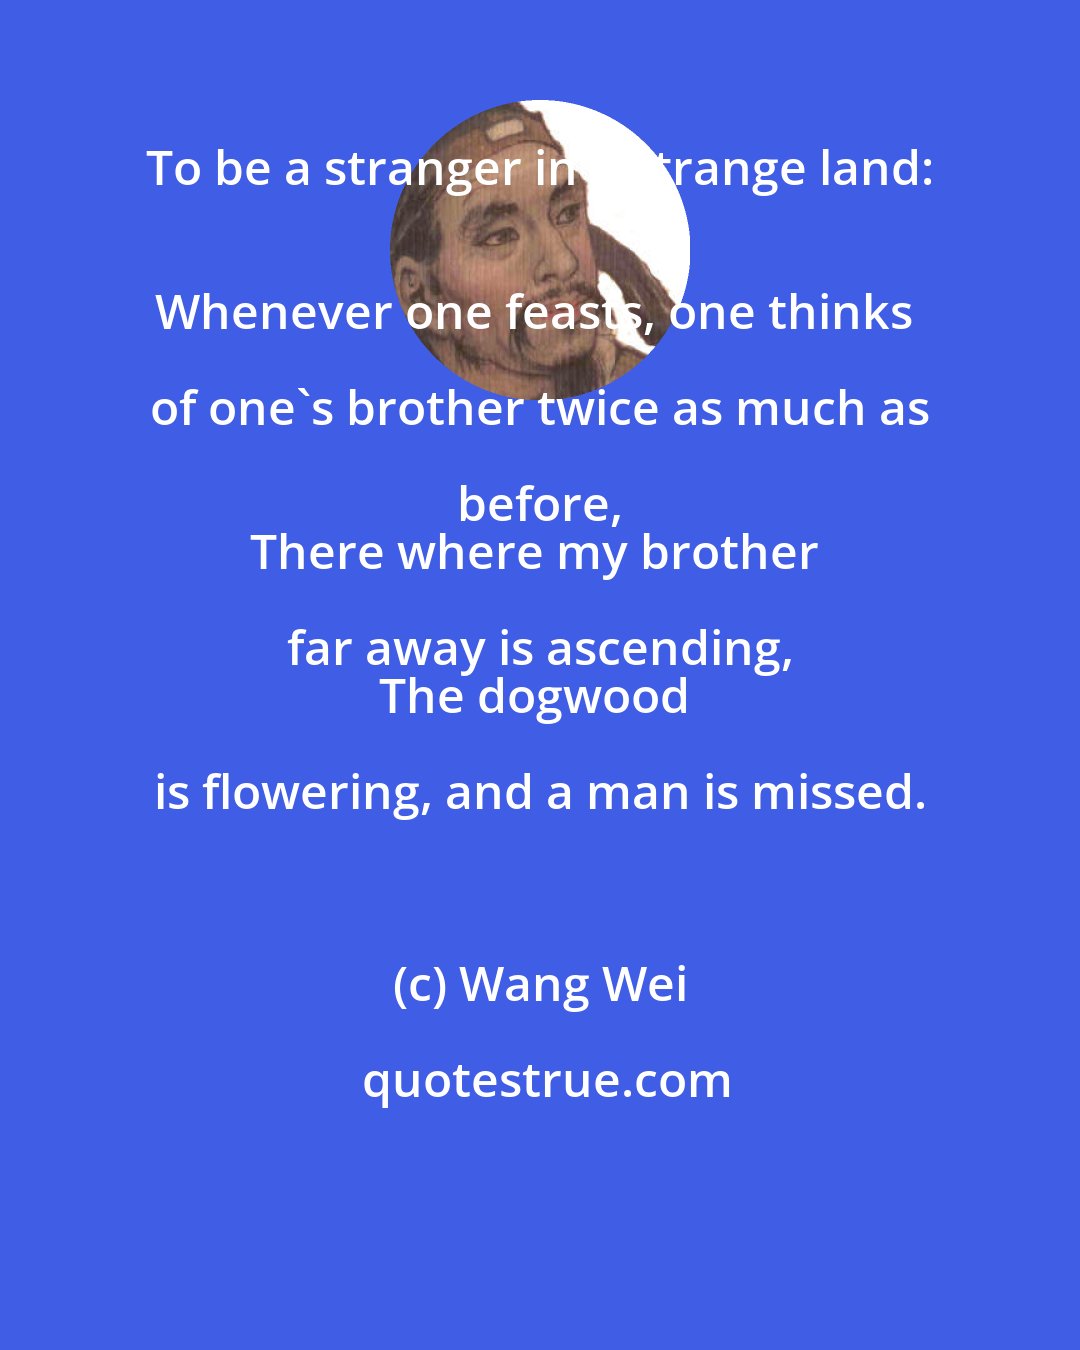 Wang Wei: To be a stranger in a strange land: 
Whenever one feasts, one thinks of one's brother twice as much as before, 
There where my brother far away is ascending, 
The dogwood is flowering, and a man is missed.